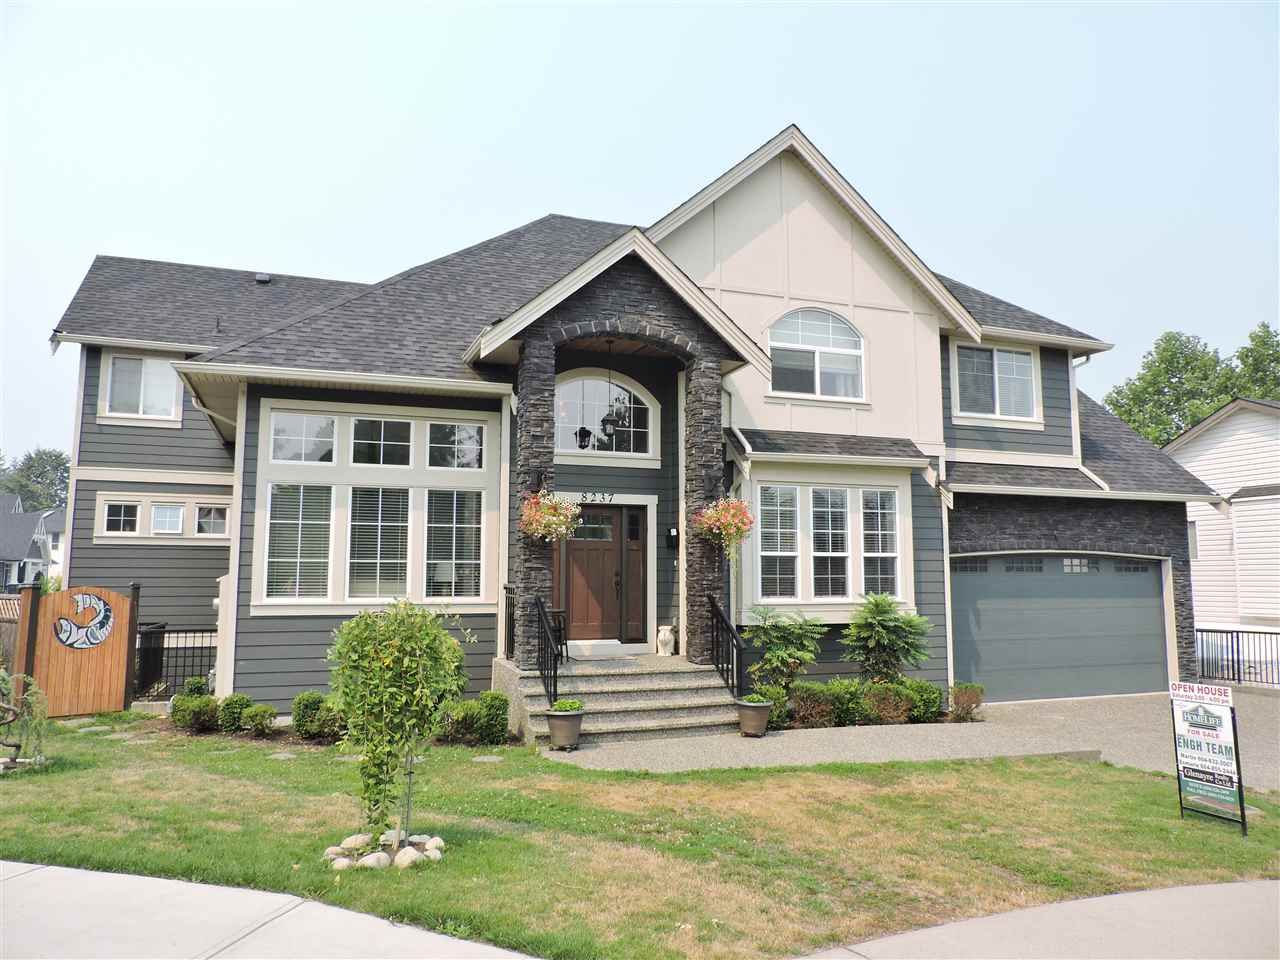 Main Photo: 8237 TANAKA TERRACE in Mission: Mission BC House for sale : MLS®# R2193387